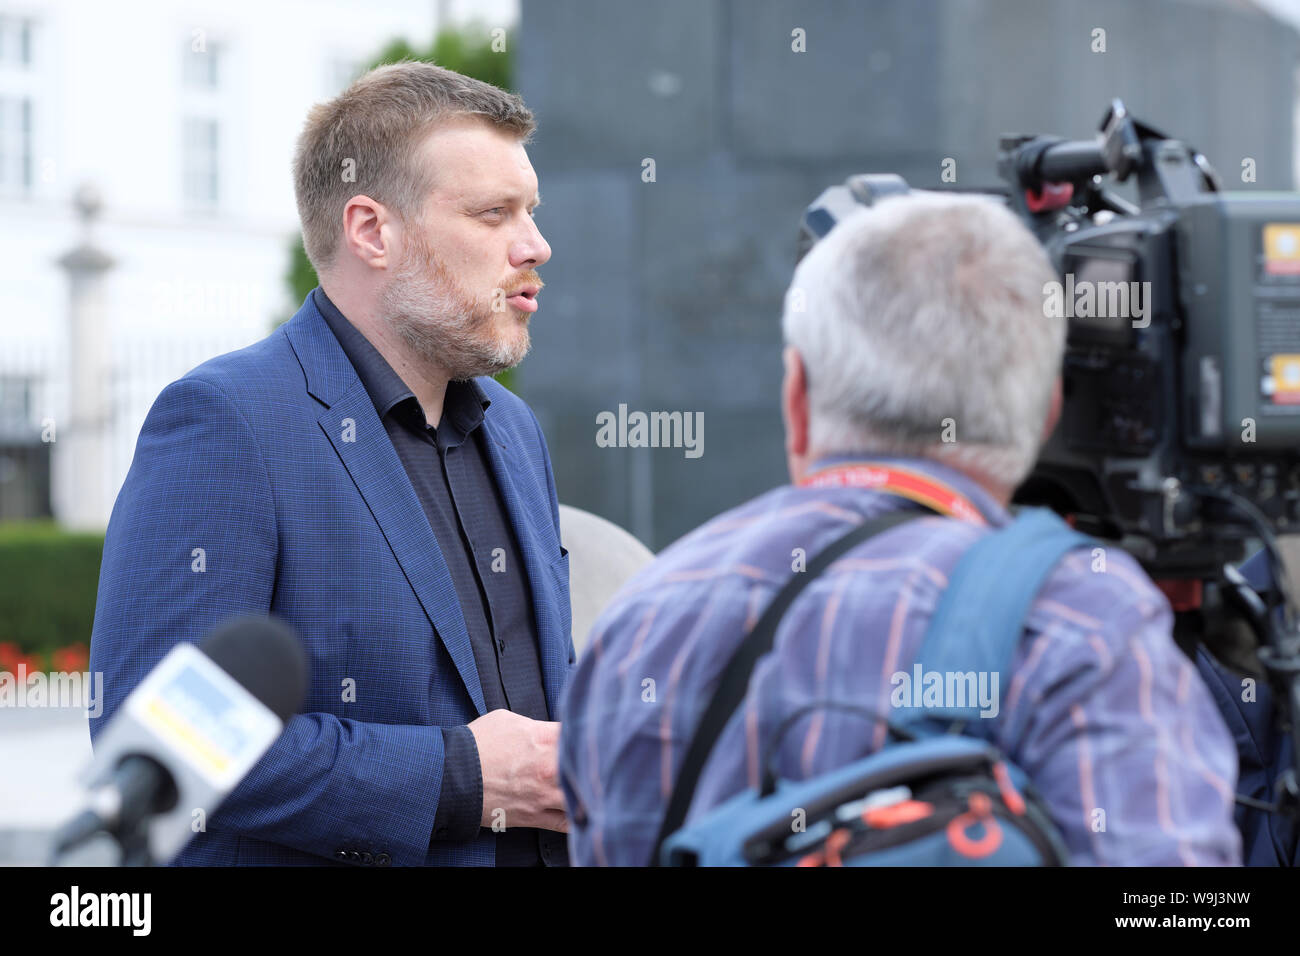 Warsaw Poland politician Adrian Zanderberg member of the Partia Razem party being interviewed by the media in August 2019 Stock Photo